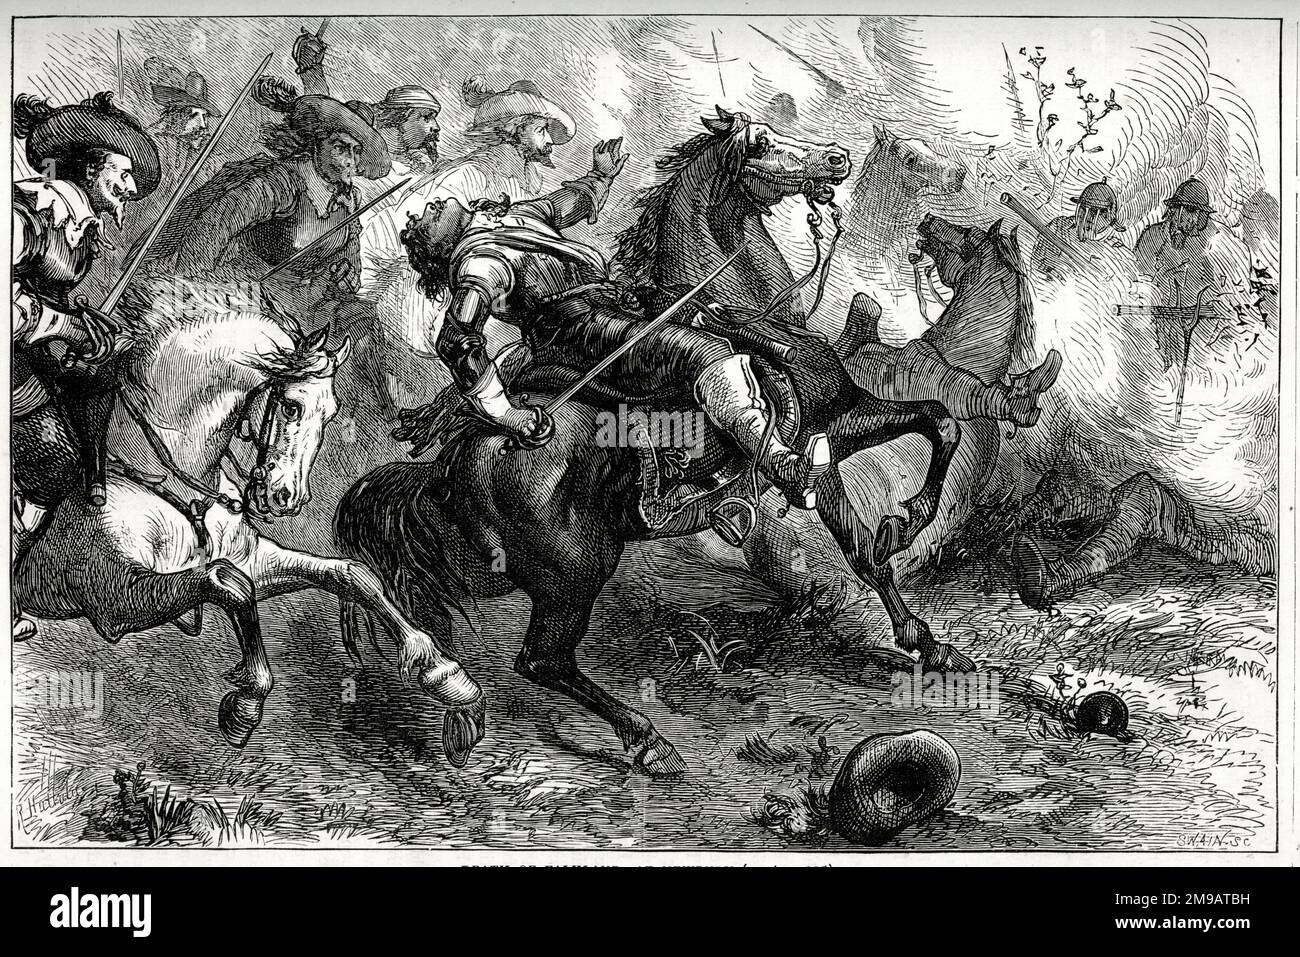 Death of Lucius Cary, 2nd Viscount Falkland, fighting on the Royalist side in the First Battle of Newbury, Berkshire, 20 September 1643, during the English Civil War (1642-1651). Stock Photo